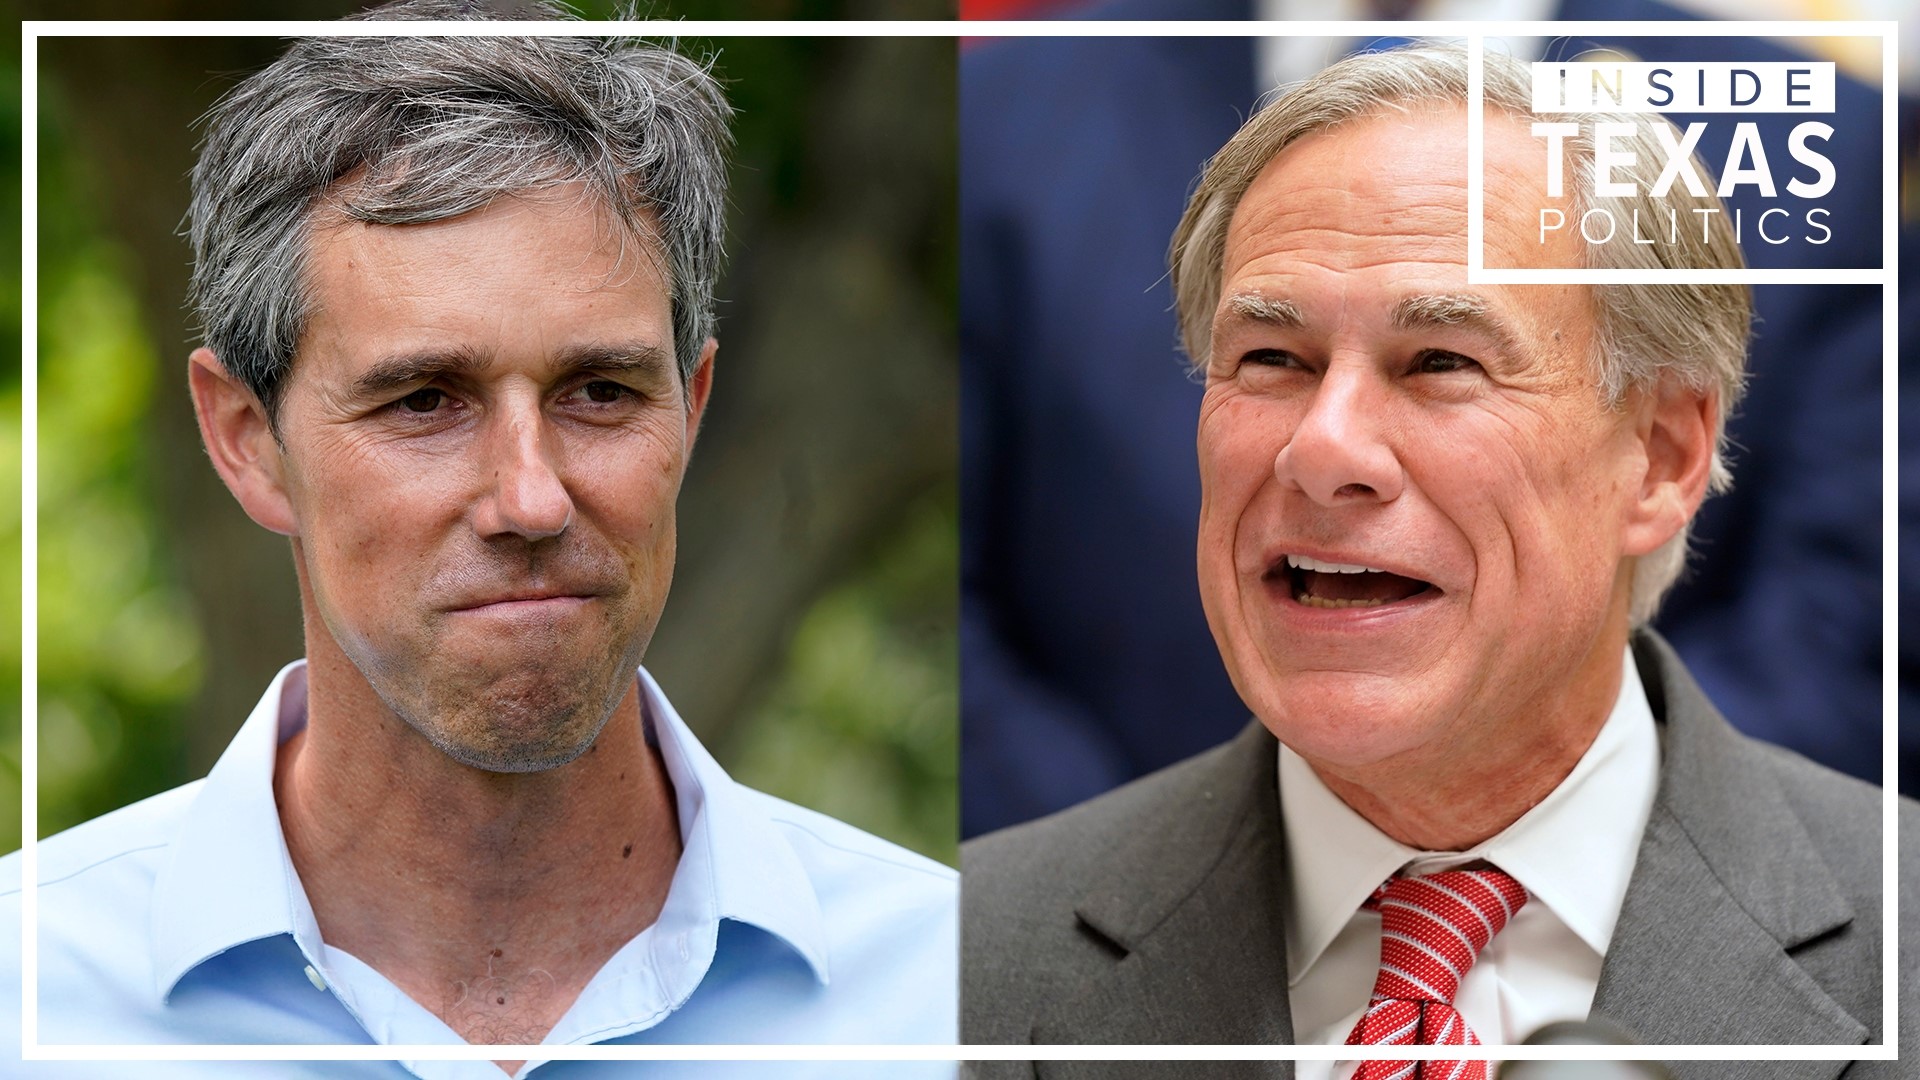 Current poll numbers aren't telling the whole story of the race for Texas governor.